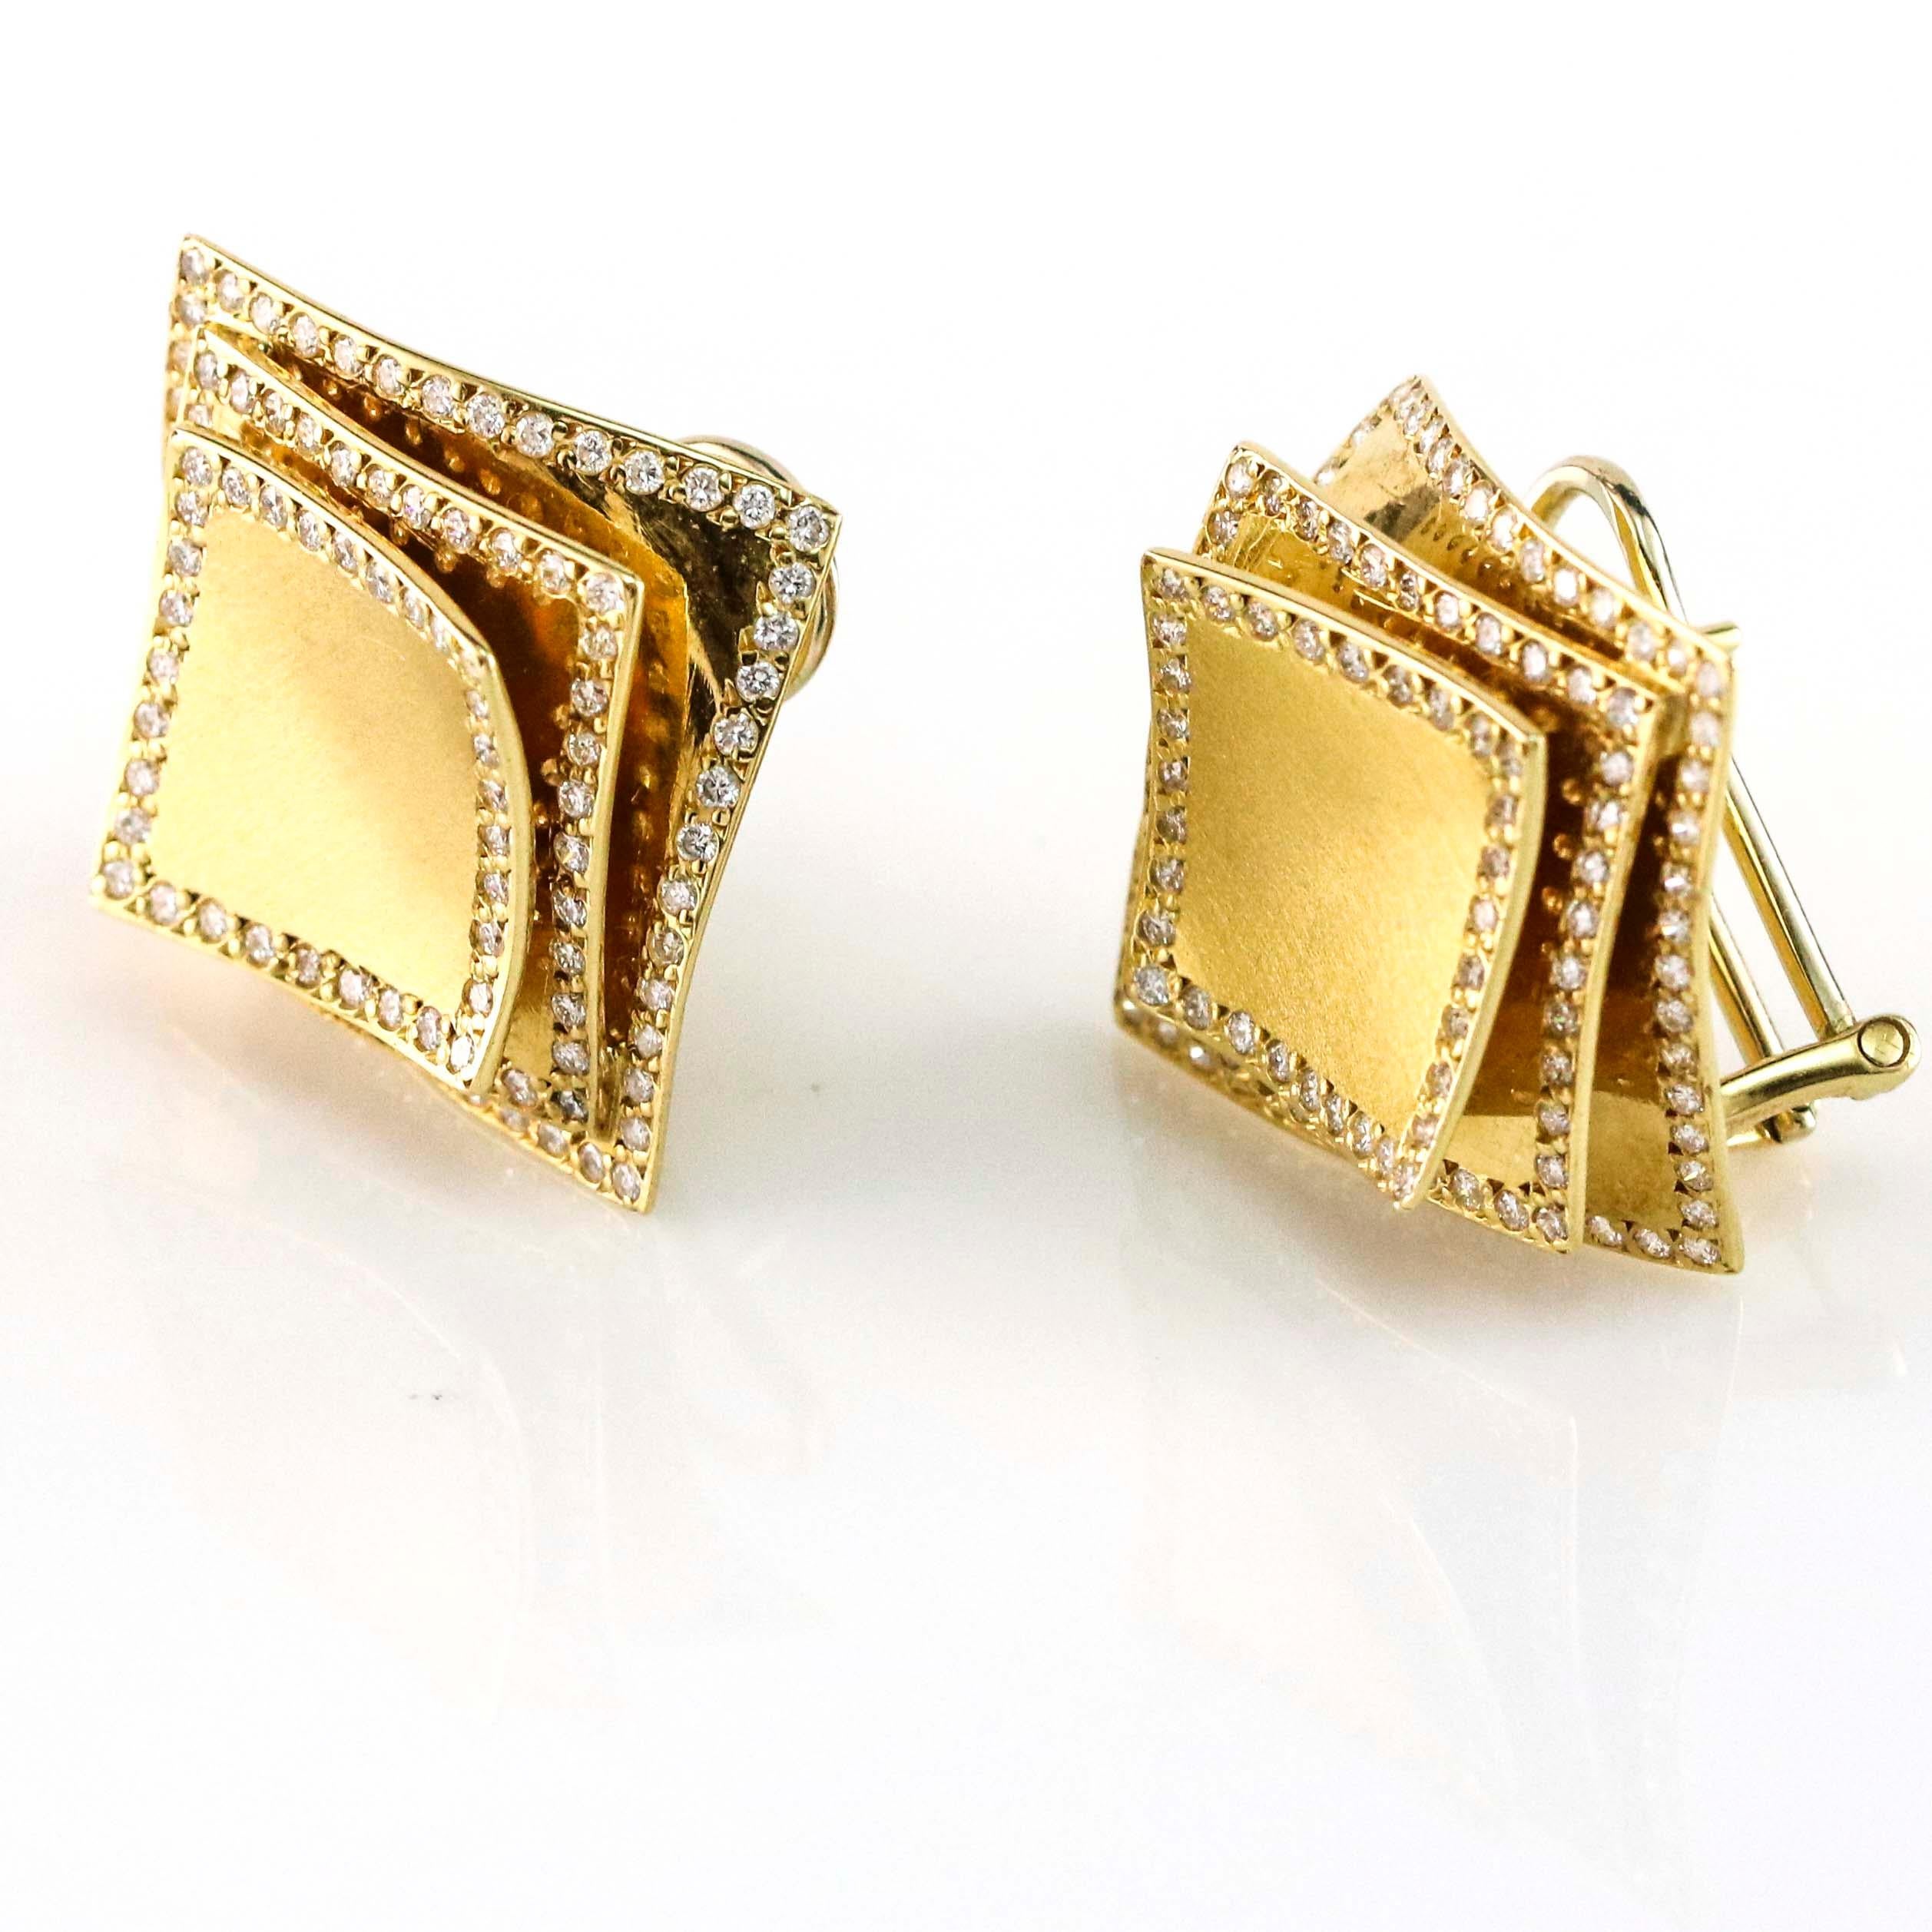 Delicate stud earrings with diamonds on edges of each gold layer. Omega backs. Signed FR. Estimated total carat weight, 1.80 carats.